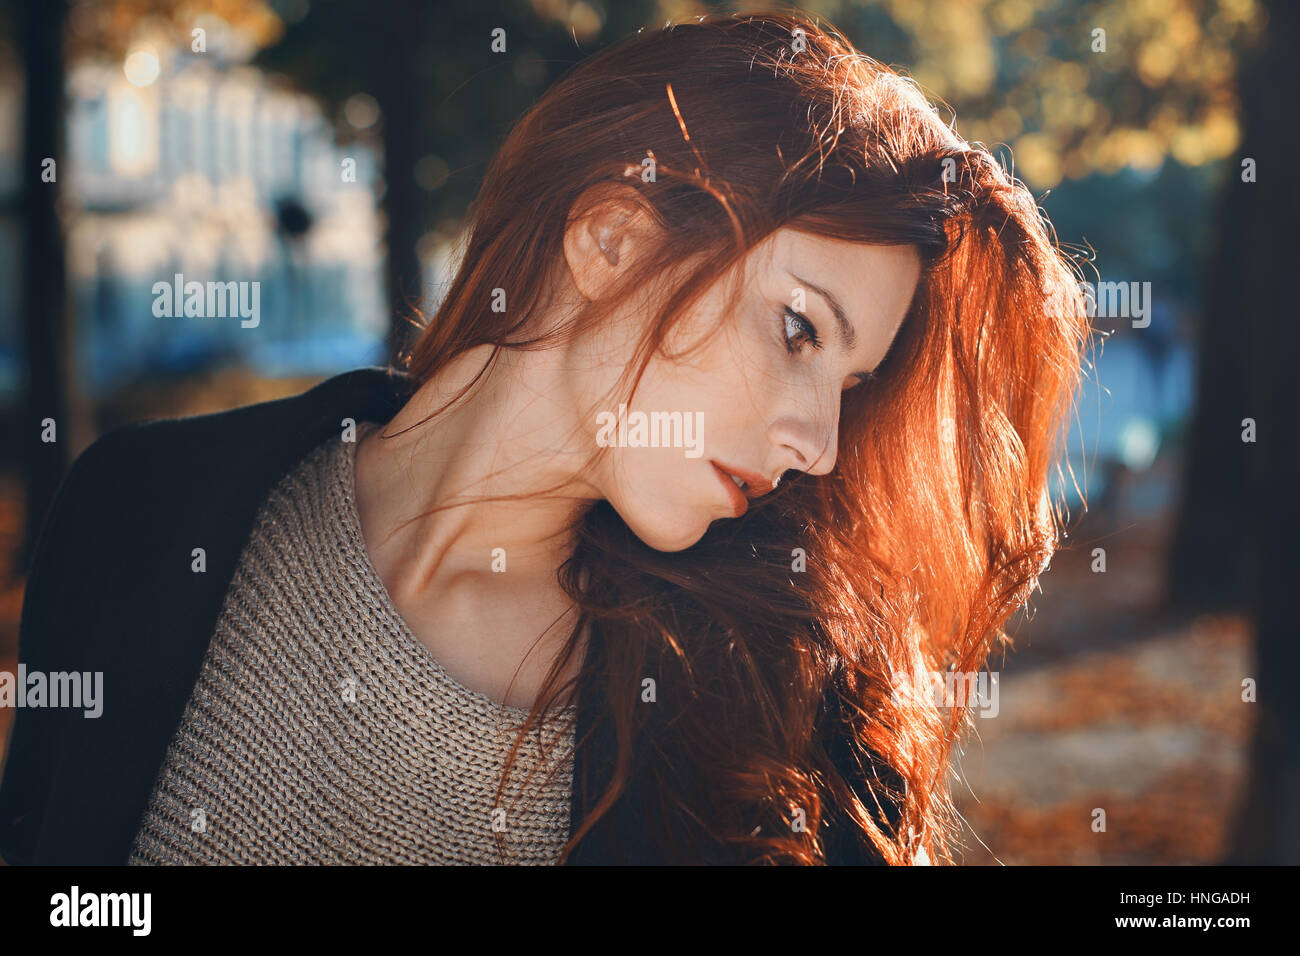 Autumn portrait of a beautiful red haired woman. City and urban Stock Photo